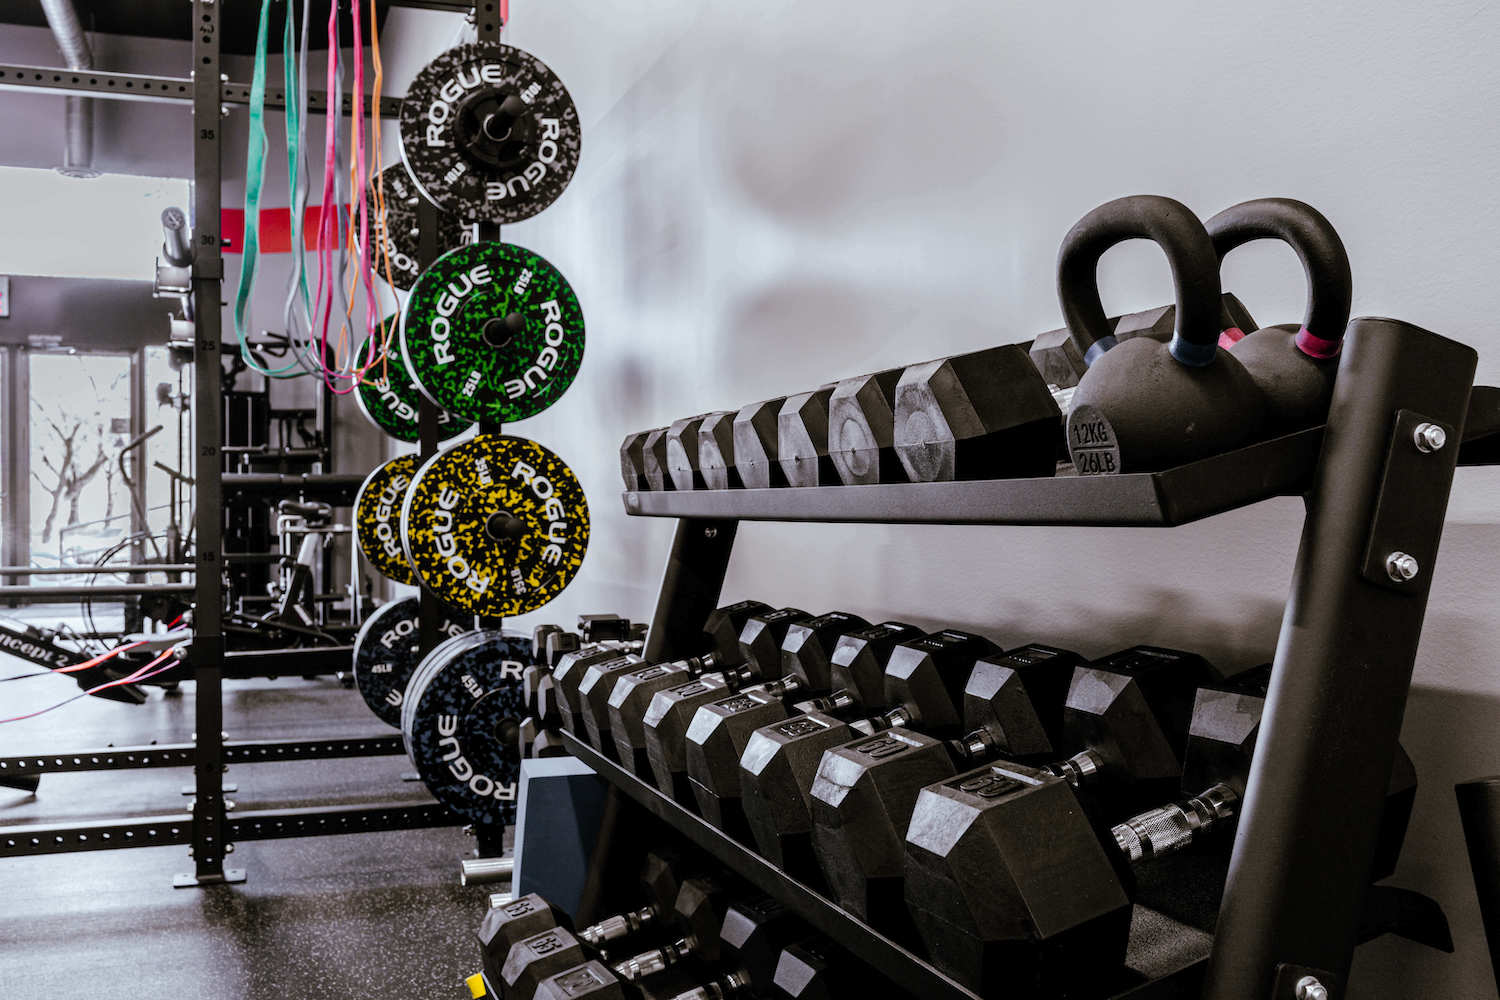 Modern equipment from Studio Fit U in our private gym in Montreal, showing a variety of high quality private training machines suitable for weight loss and muscle building.